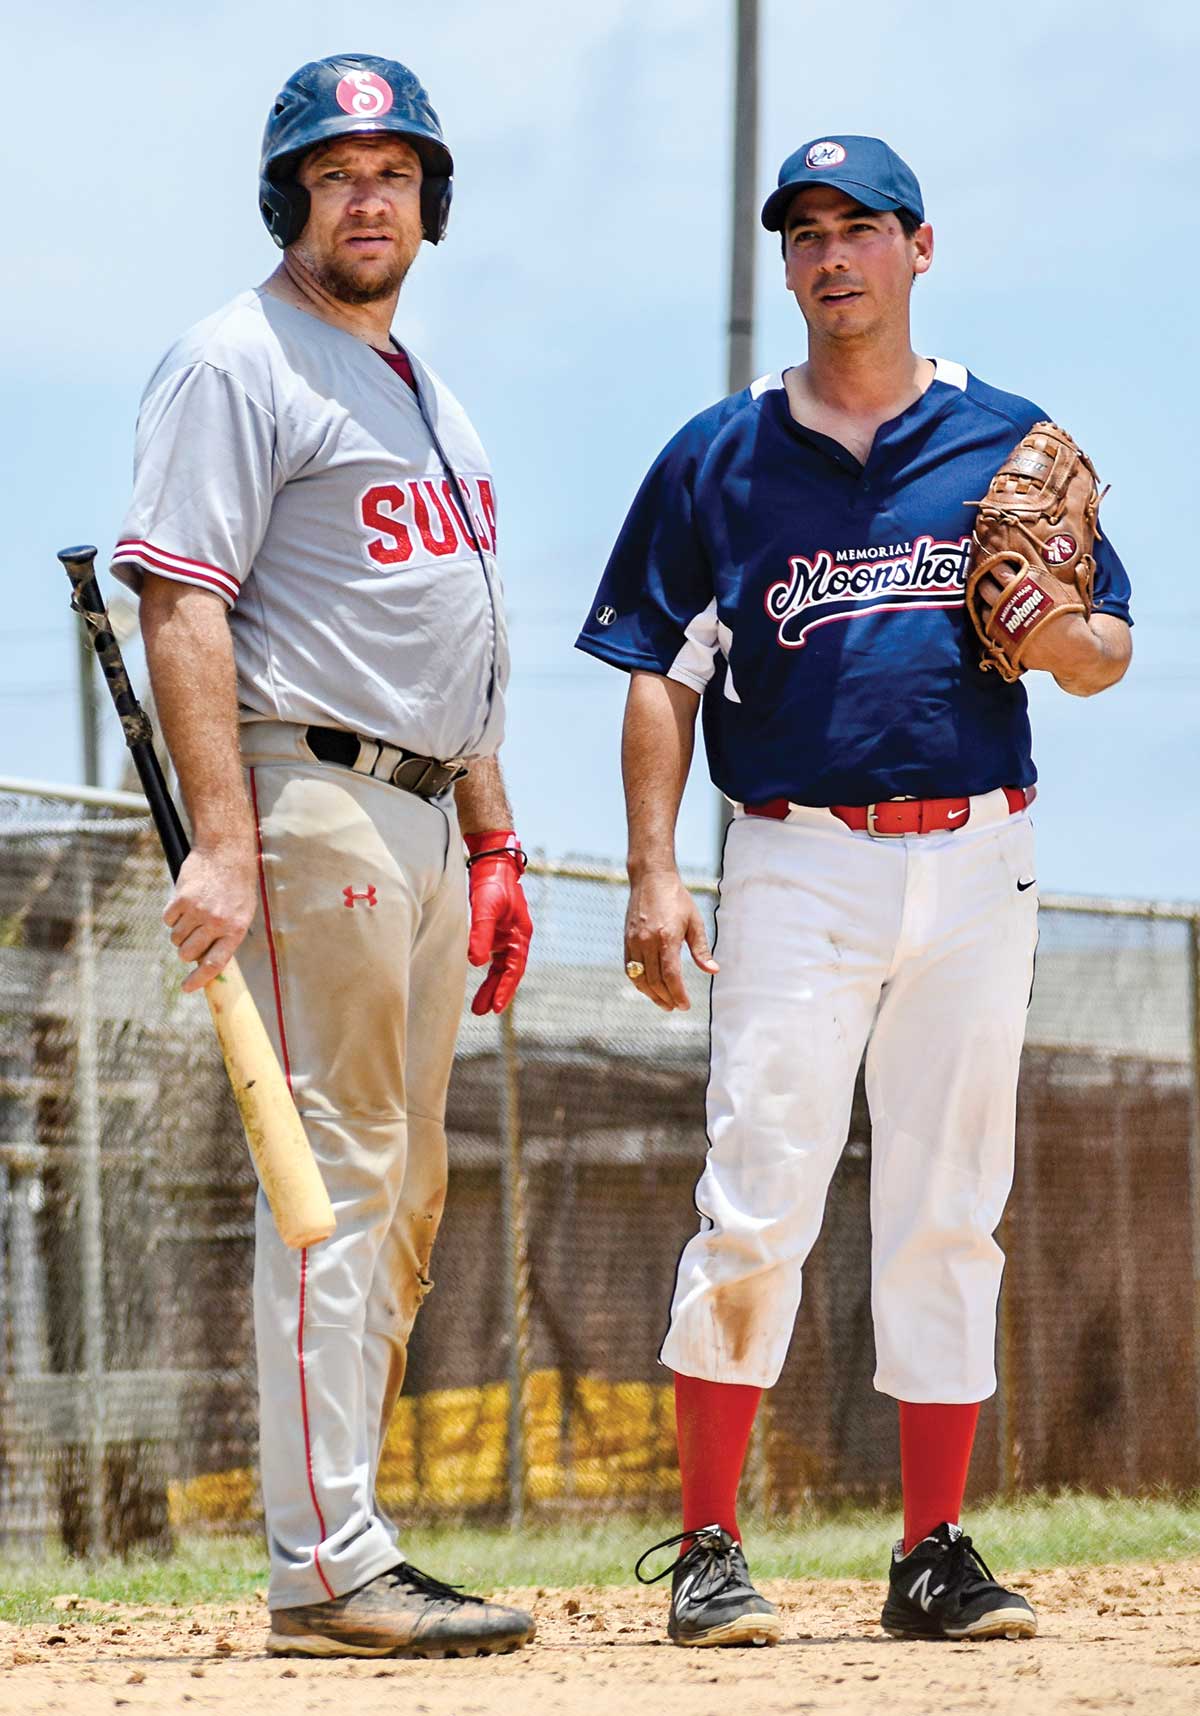 two players in a sandlot game